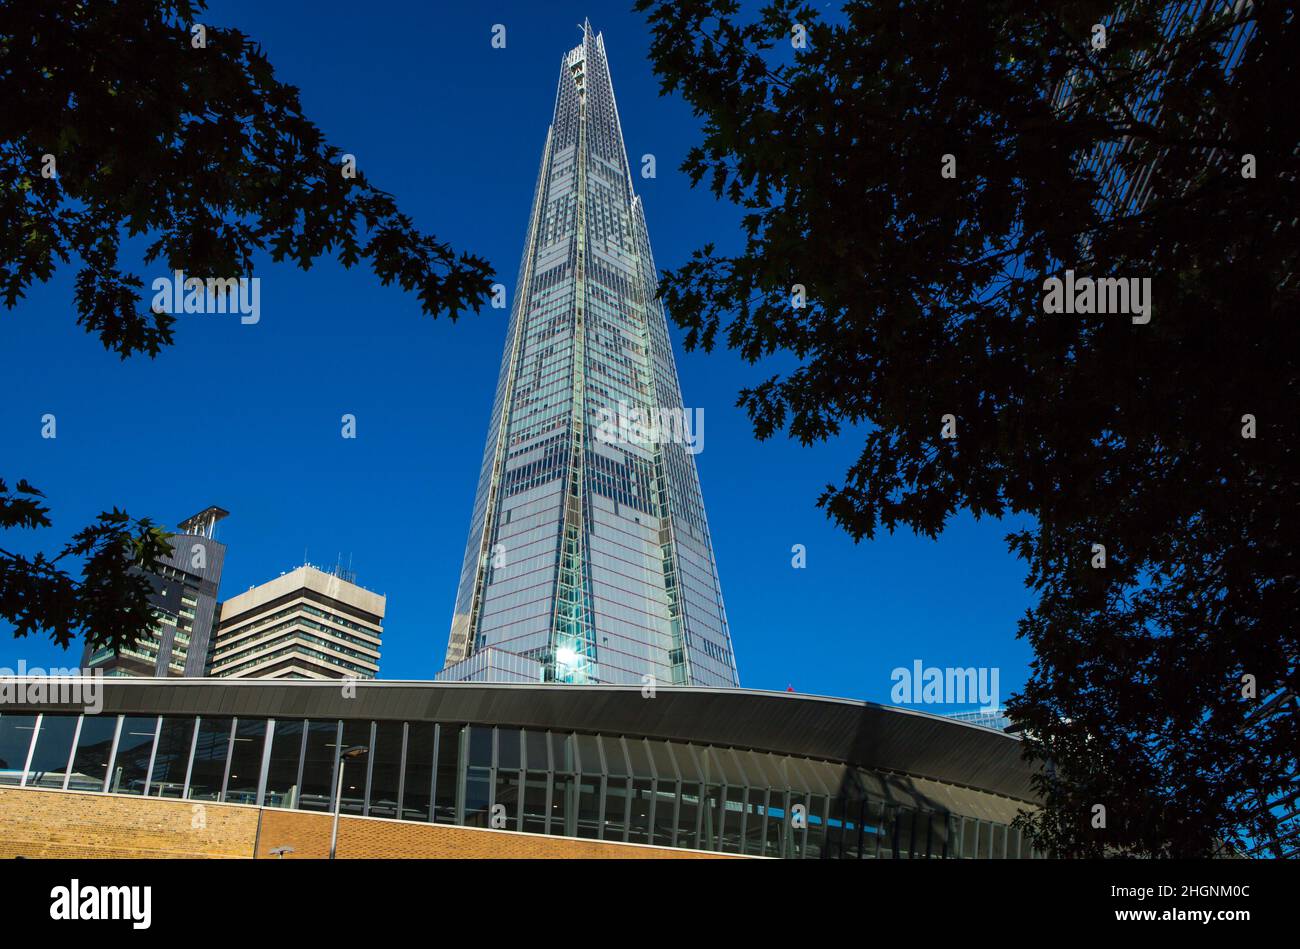 UNITED KINGDOM. LONDON. THE SHARD TOWER. Formerly The London Bridge Tower, is a skyscraper of offices and luxury housing located in the borough of Sou Stock Photo